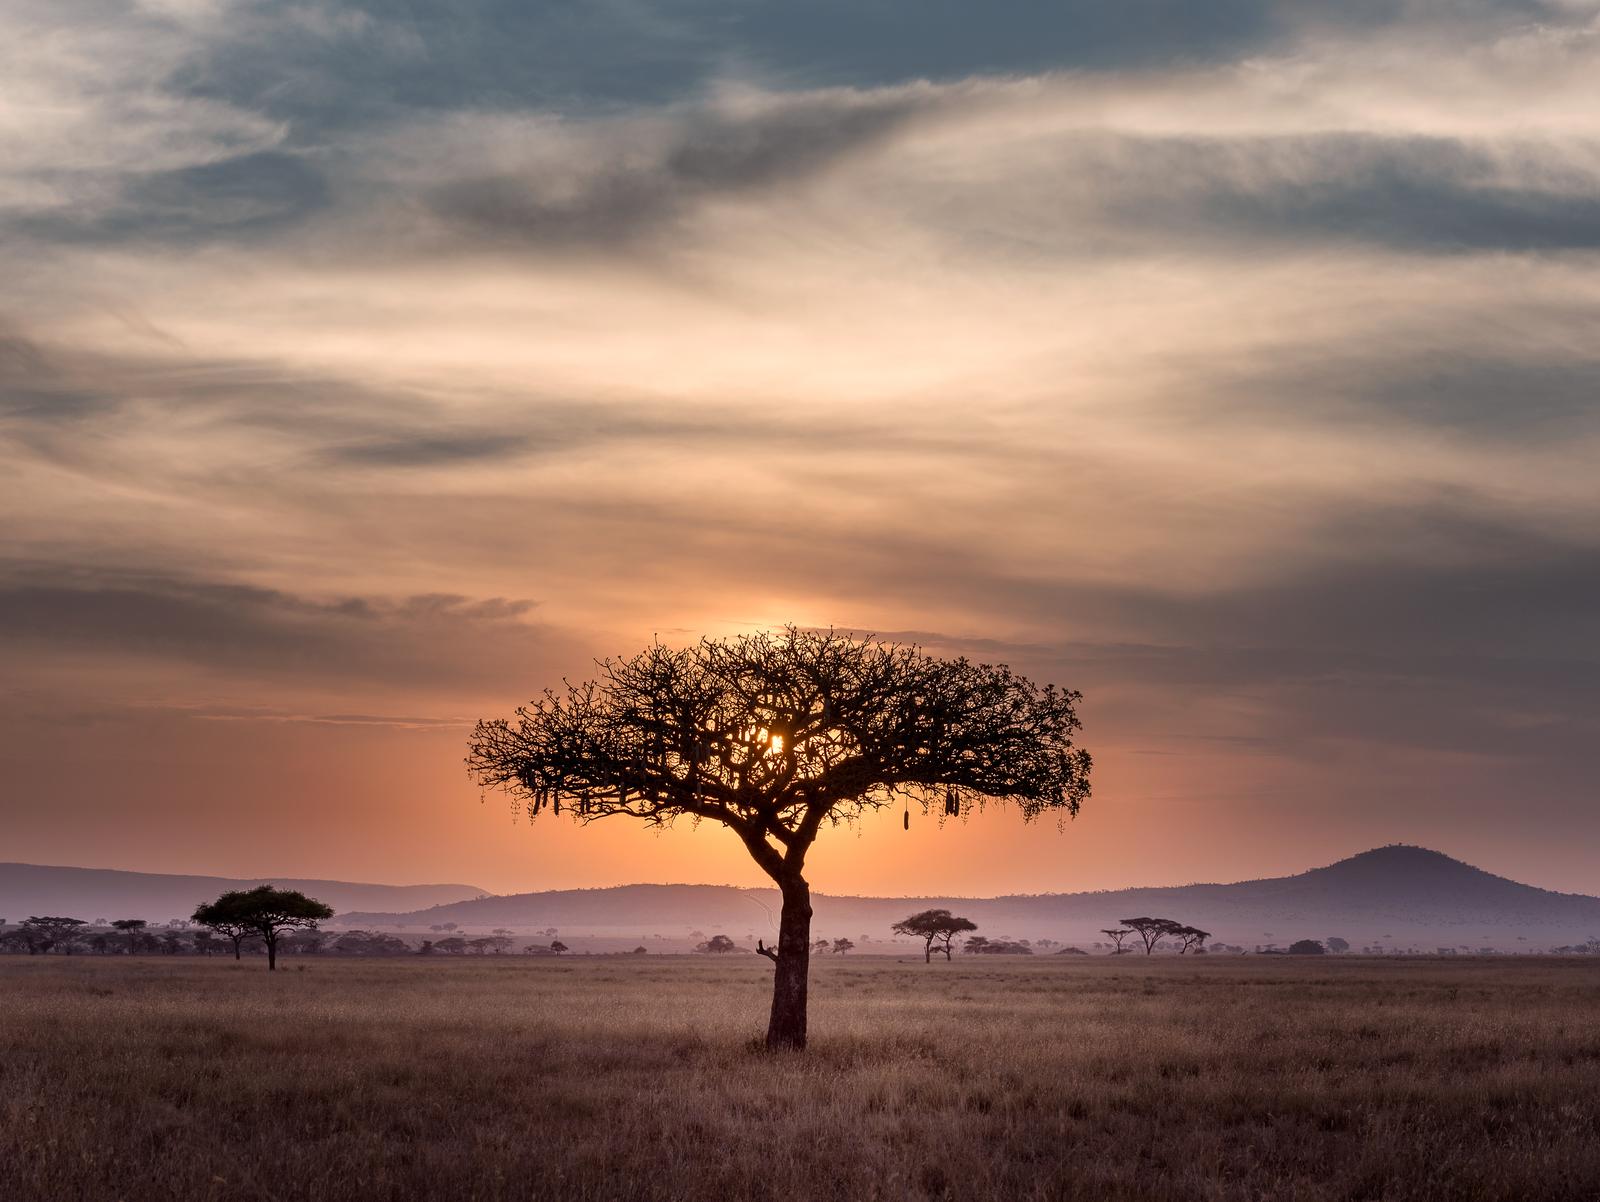 Can You Match These Natural Wonders to Their Locations? Sunset at Serengeti National Park, Tanzania